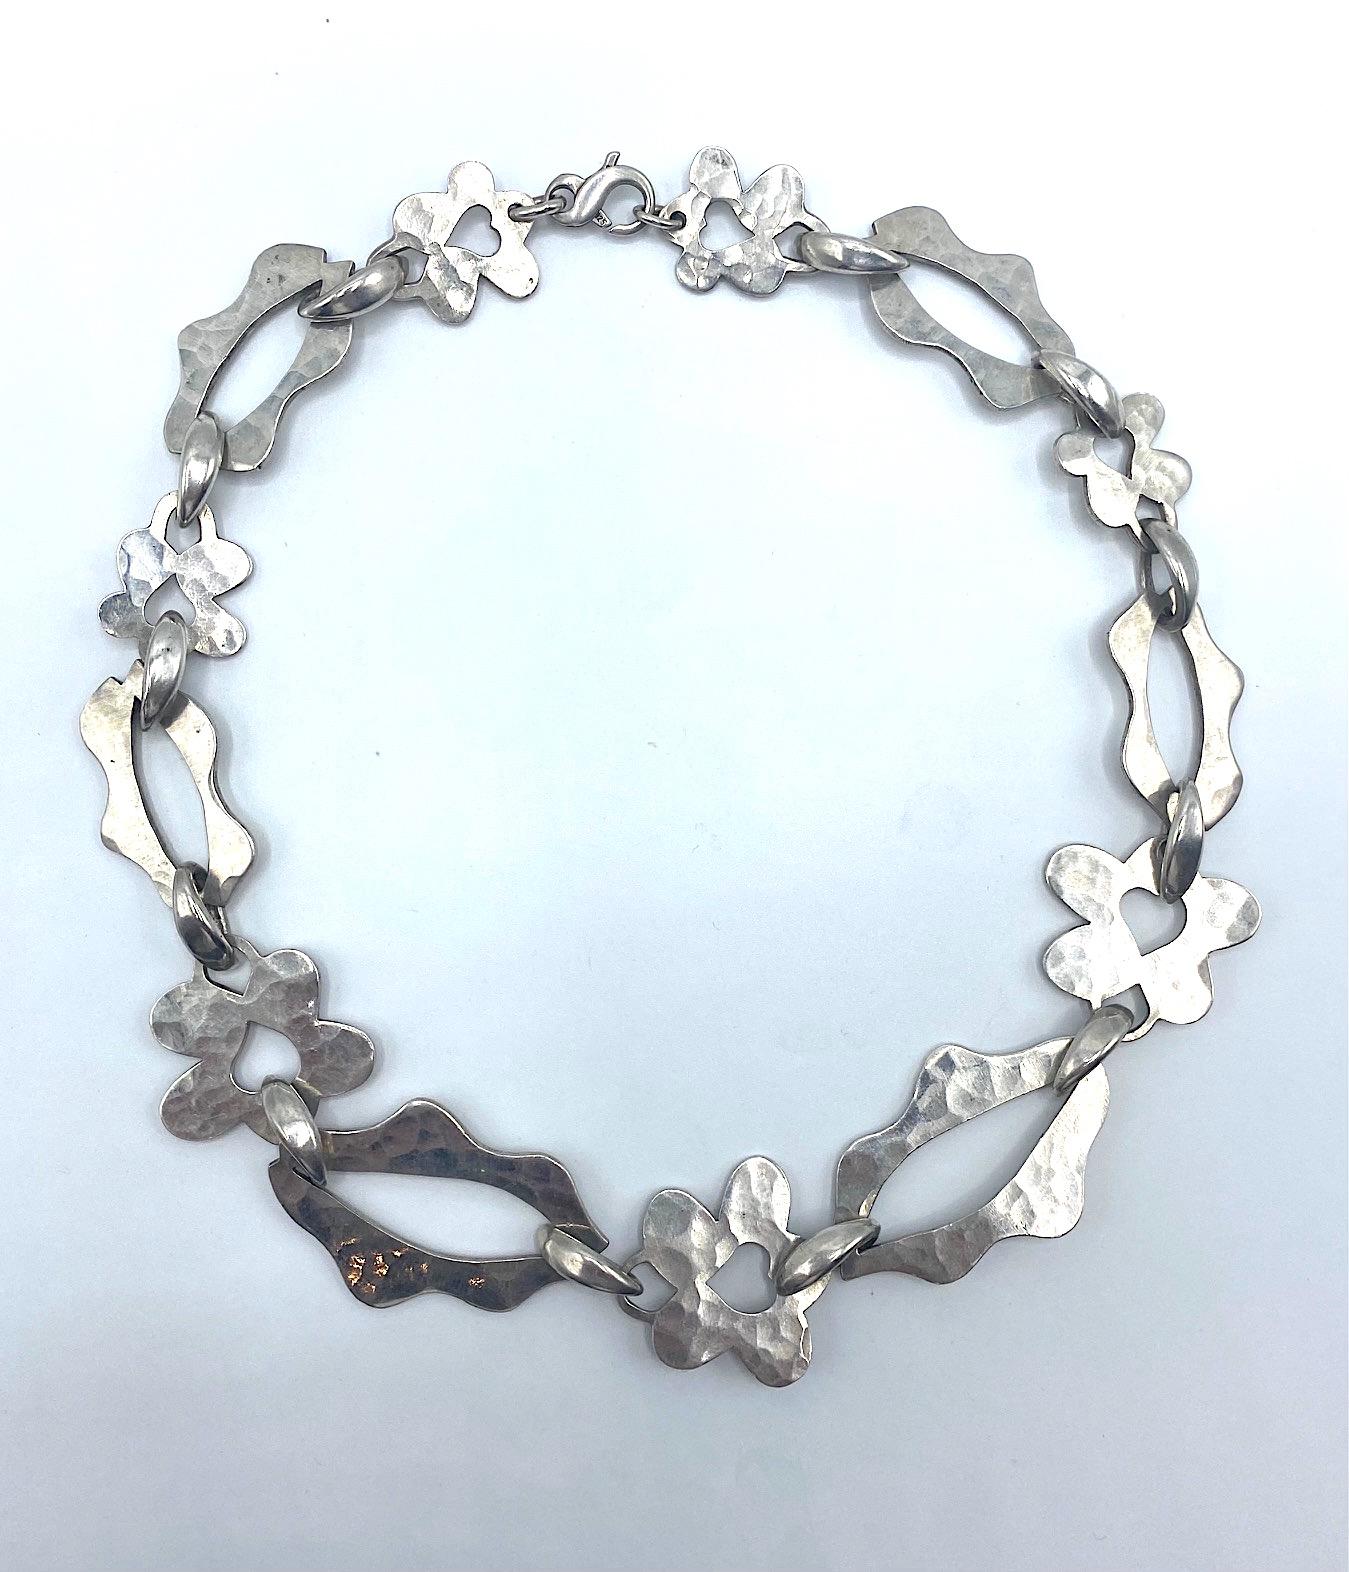 Presented is a 1990s modernist abstract sterling silver necklace by jewelry Dennis Higgins. Each link is carefully hand made with a martele' or hammered finish on the front and a smooth back. Additionally, the  connector links are all hand made .The